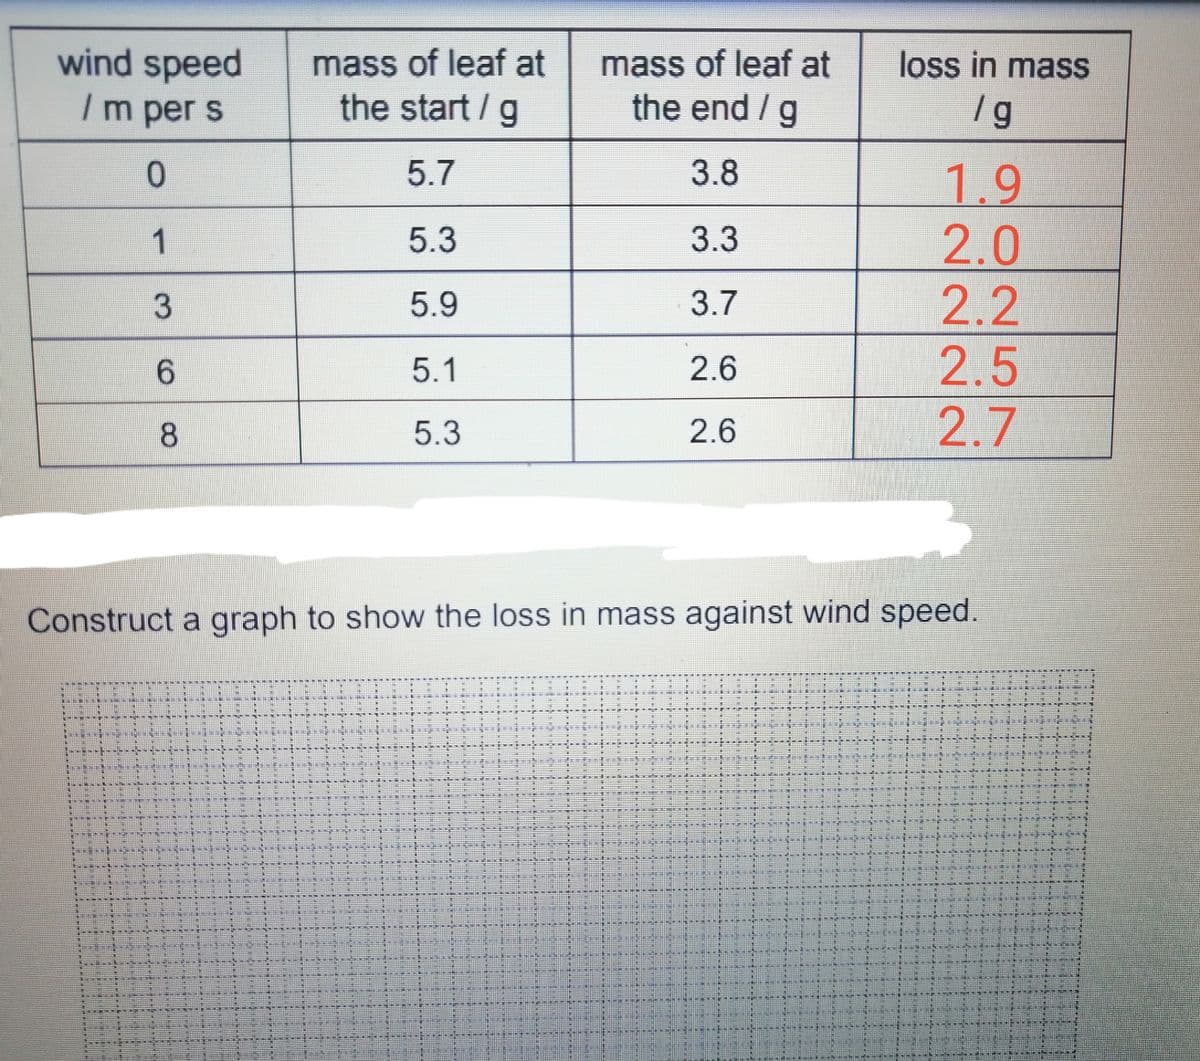 wind speed
mass of leaf at
the start /g
mass of leaf at
the end /g
loss in mass
/m per s
/g
5.7
3.8
1.9
2.0
1
5.3
3.3
5.9
3.7
2.2
2.5
2.7
6.
5.1
2.6
8.
5.3
2.6
Construct a graph to show the loss in mass against wind speed.
